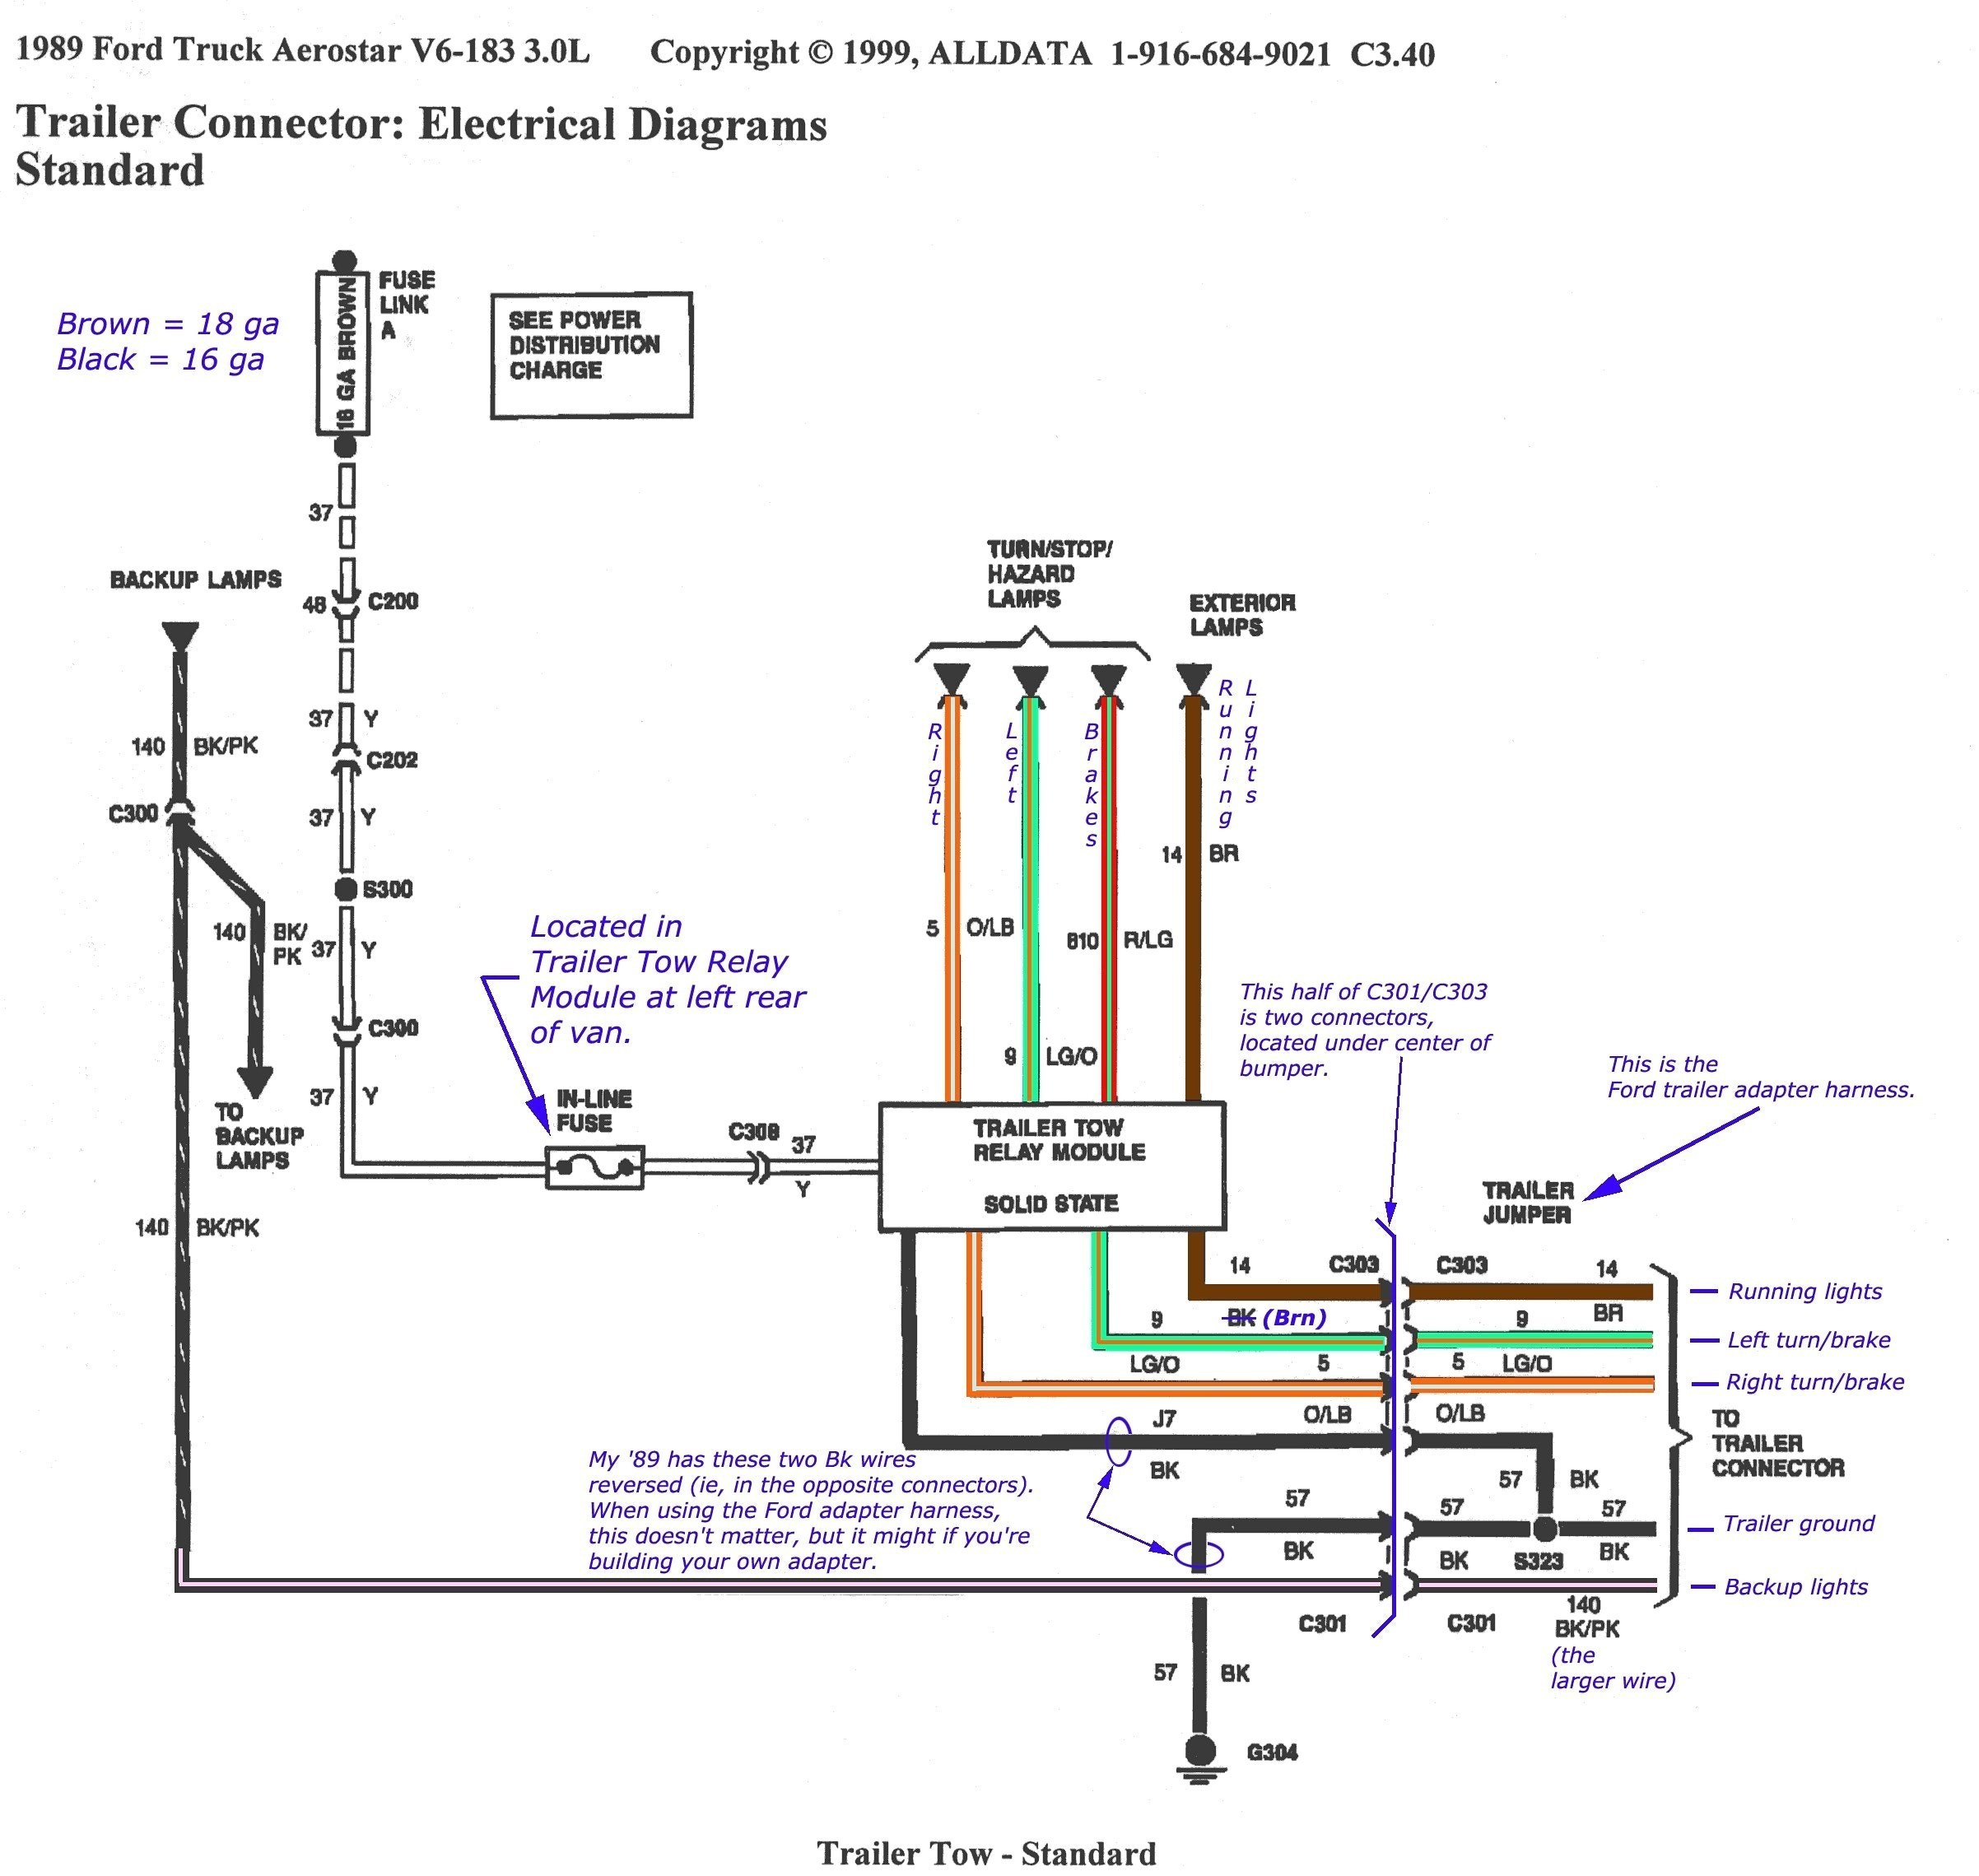 Ford 2600 Wiring Diagram Wiring Diagram Competition Cross Evening Cross Evening Fabbrovefab It